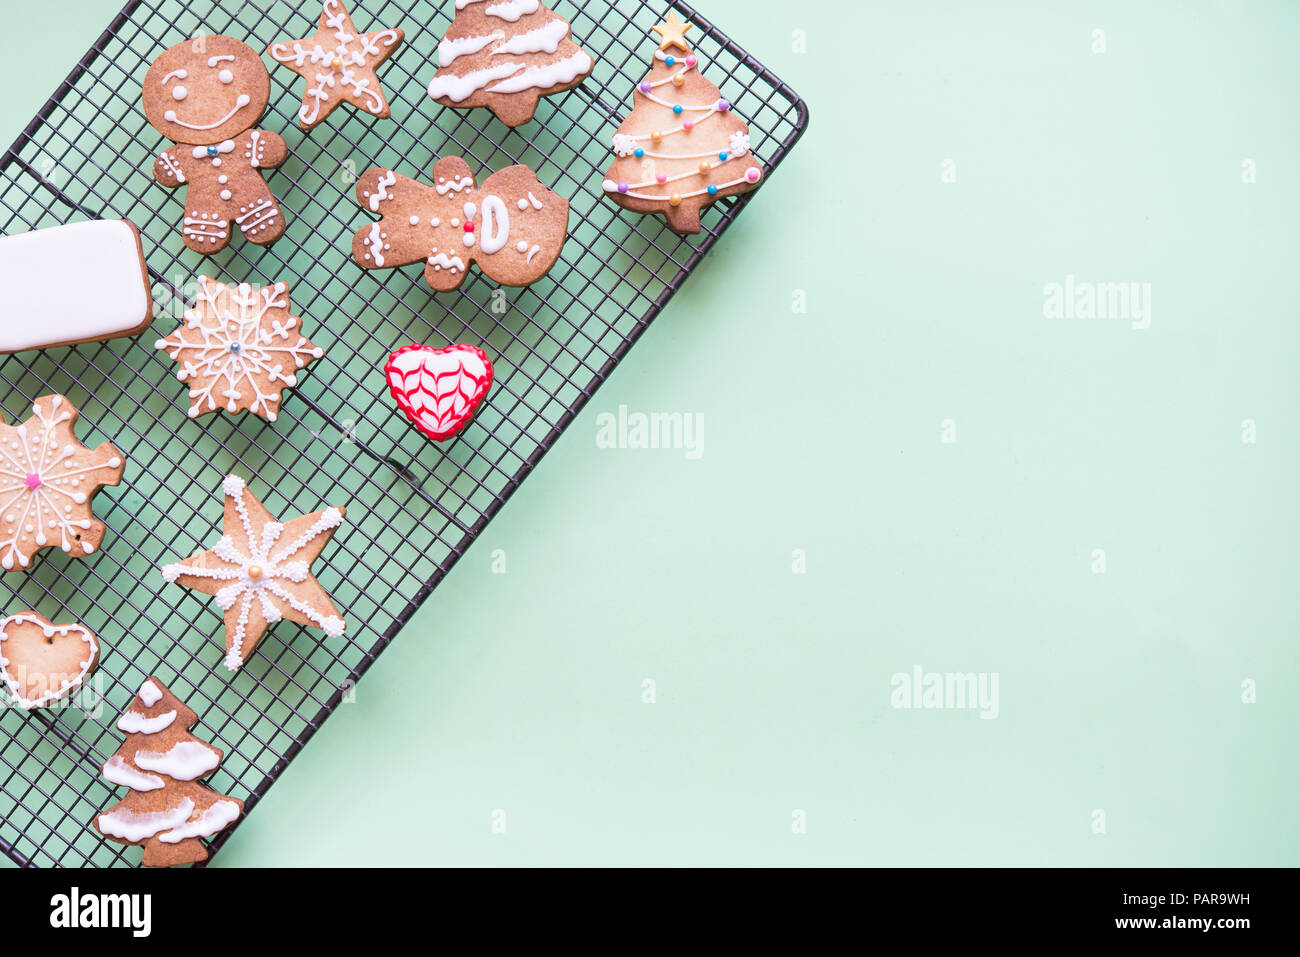 Gingerbread decorated with sugar icing on cooling rack Stock Photo